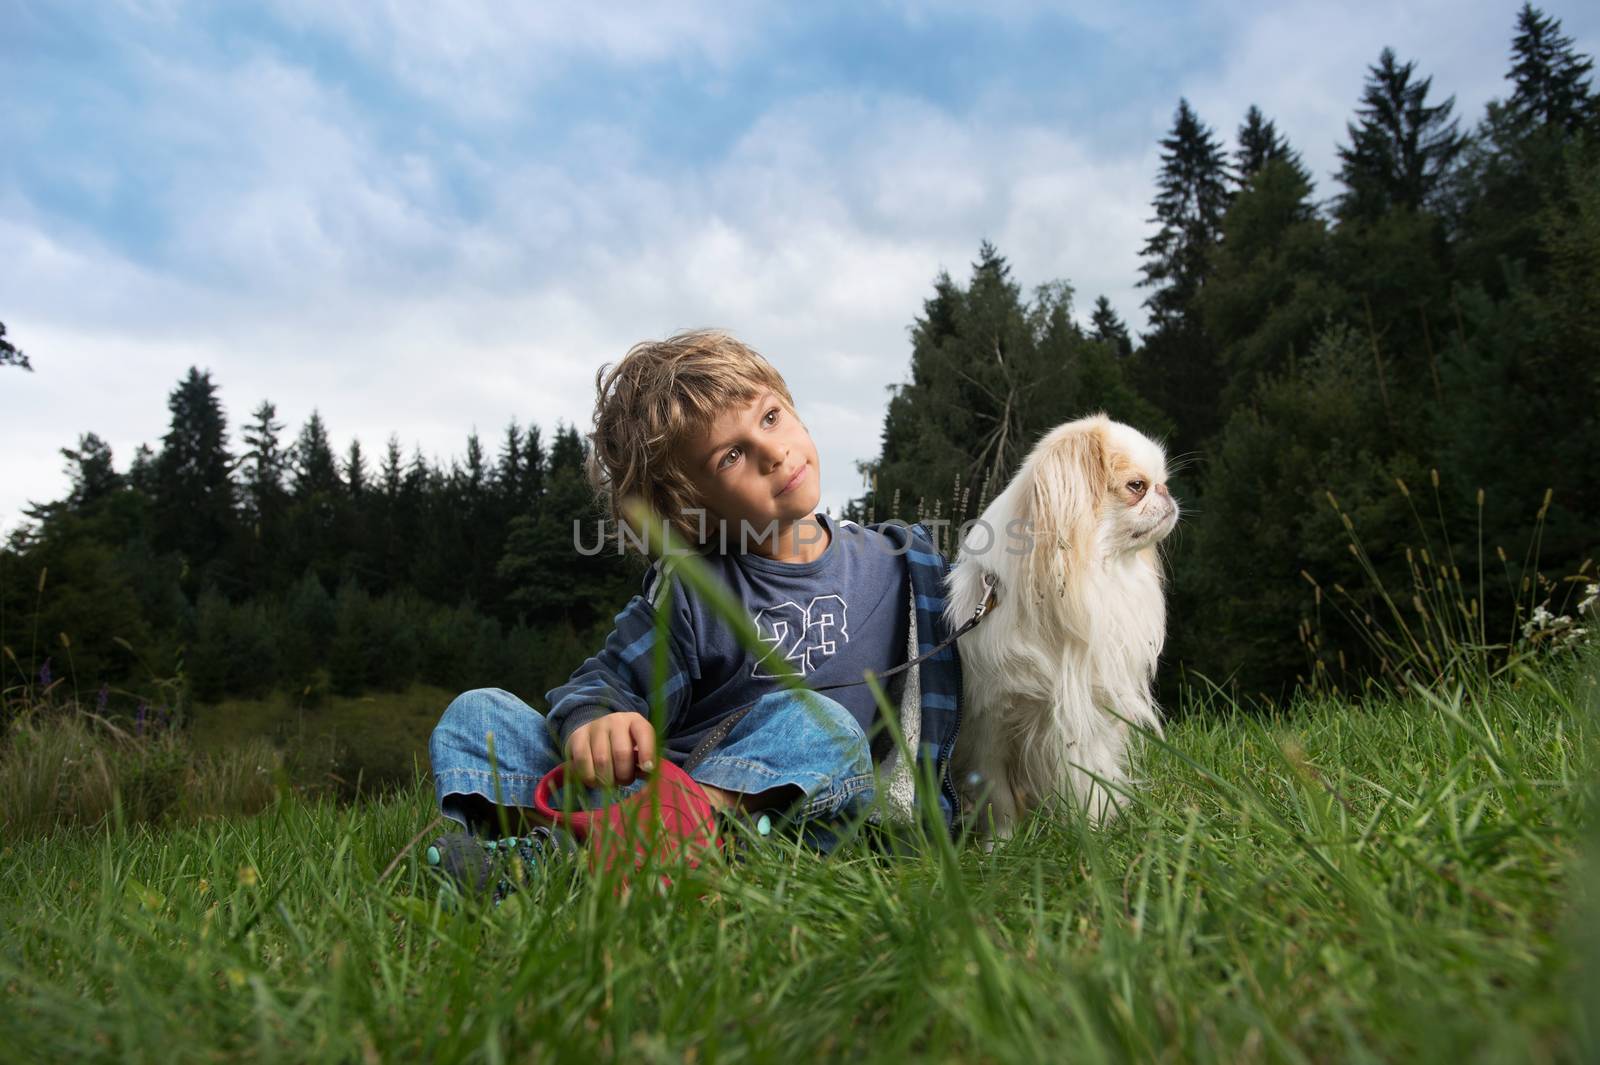 Cute little boy cuddling his dog in nature.